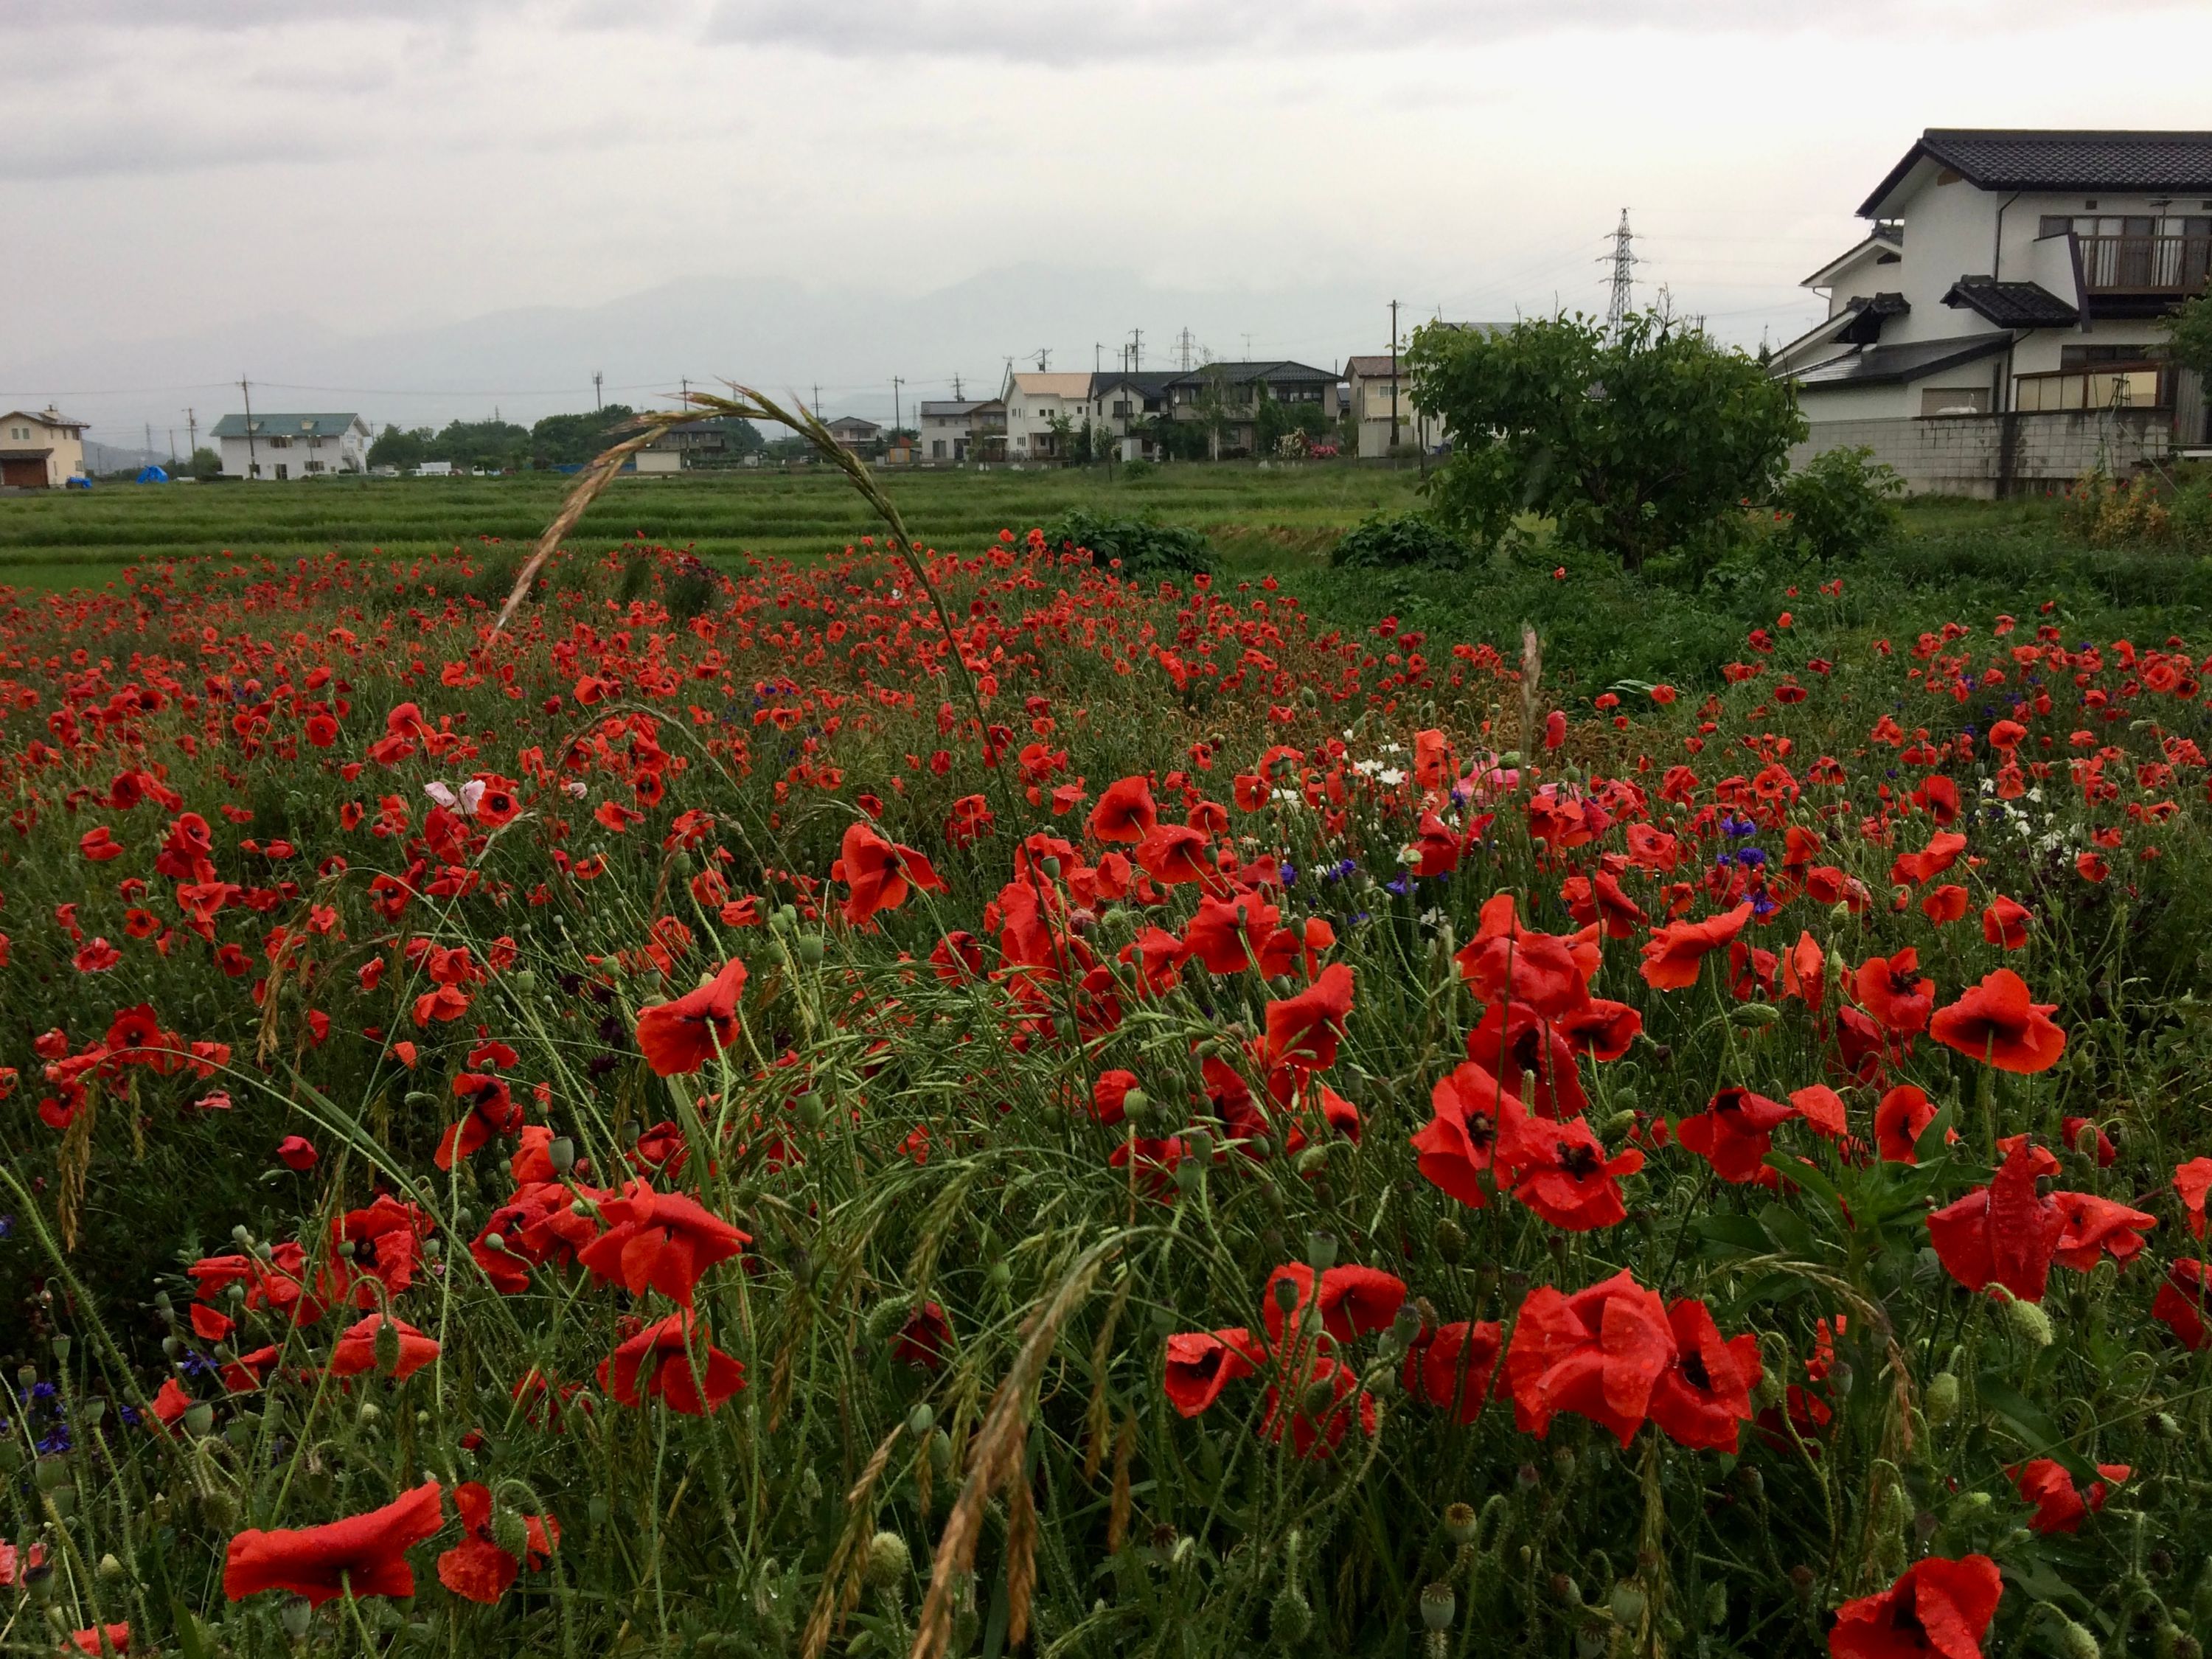 Rain-soaked poppies in a field between houses.